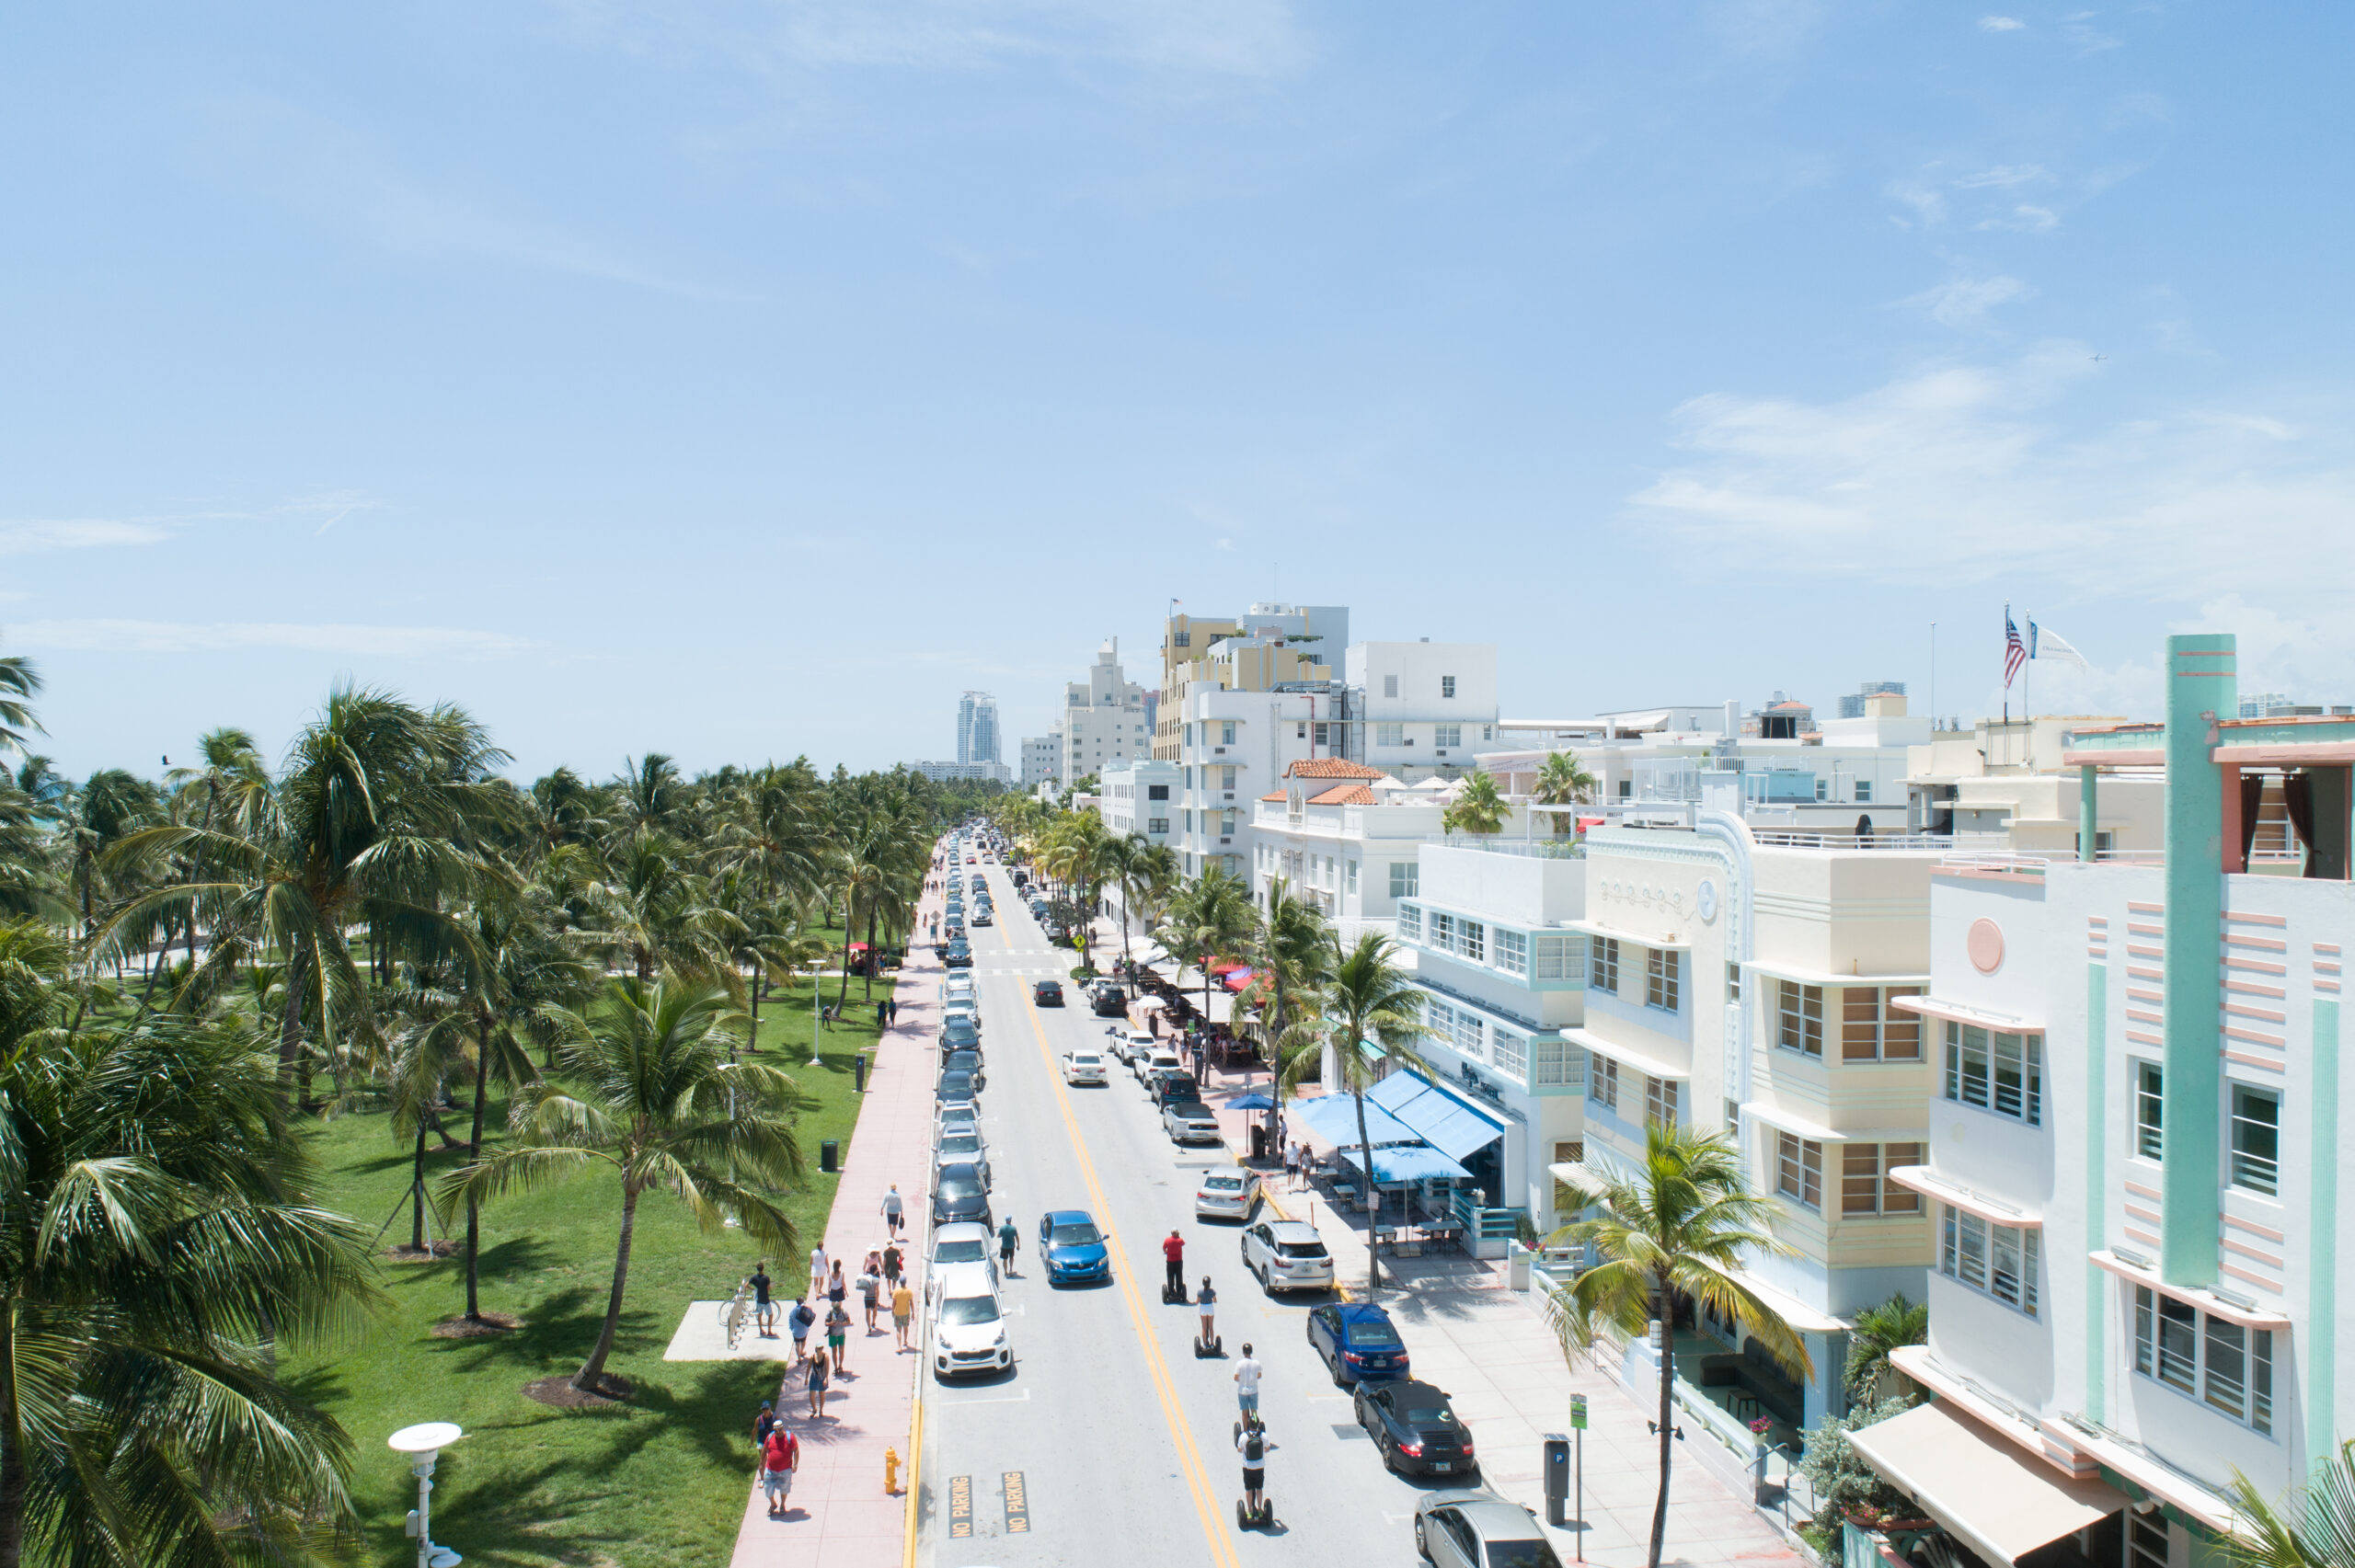 Aerial view of South Beach off of Ocean Drive. To the left, a linear grassy park is seen dotted with palm trees next to a paved street. Along the other side of the street, colorful art deco buildings are seen.